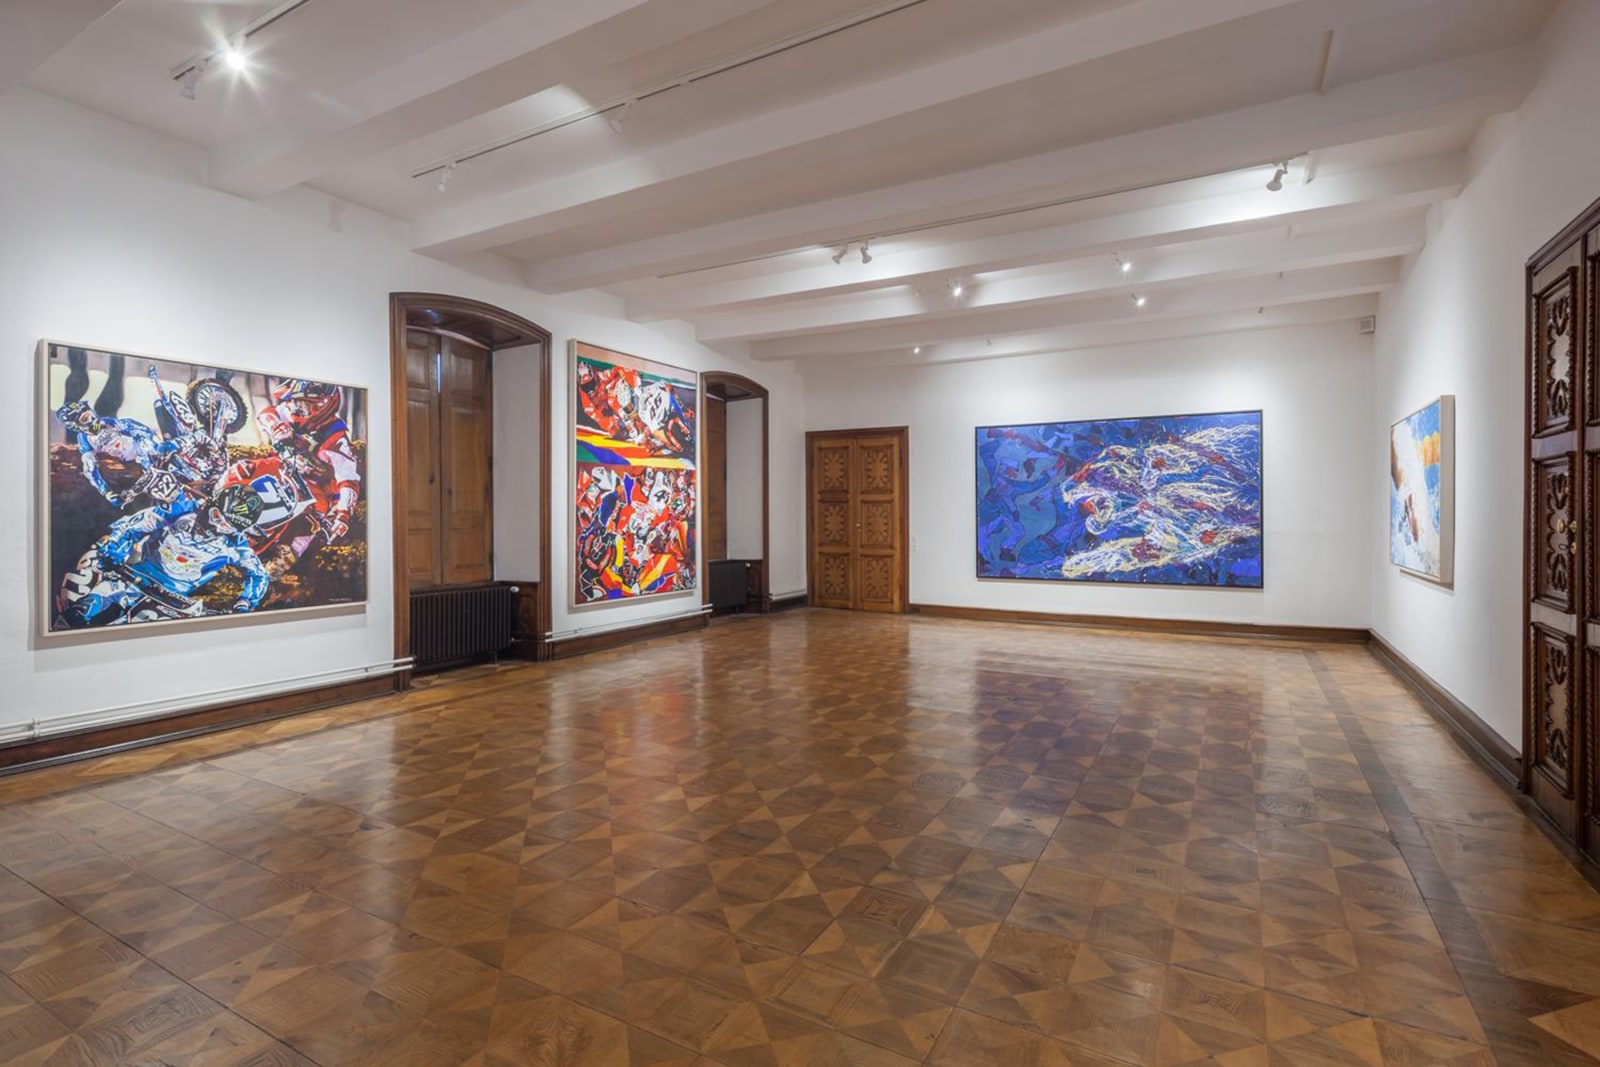 Installation view, Malcolm Morley: Works from the Hall Collection, Hall Art Foundation, Schloss Derneburg Museum, Derneburg, Germany, 2017-18